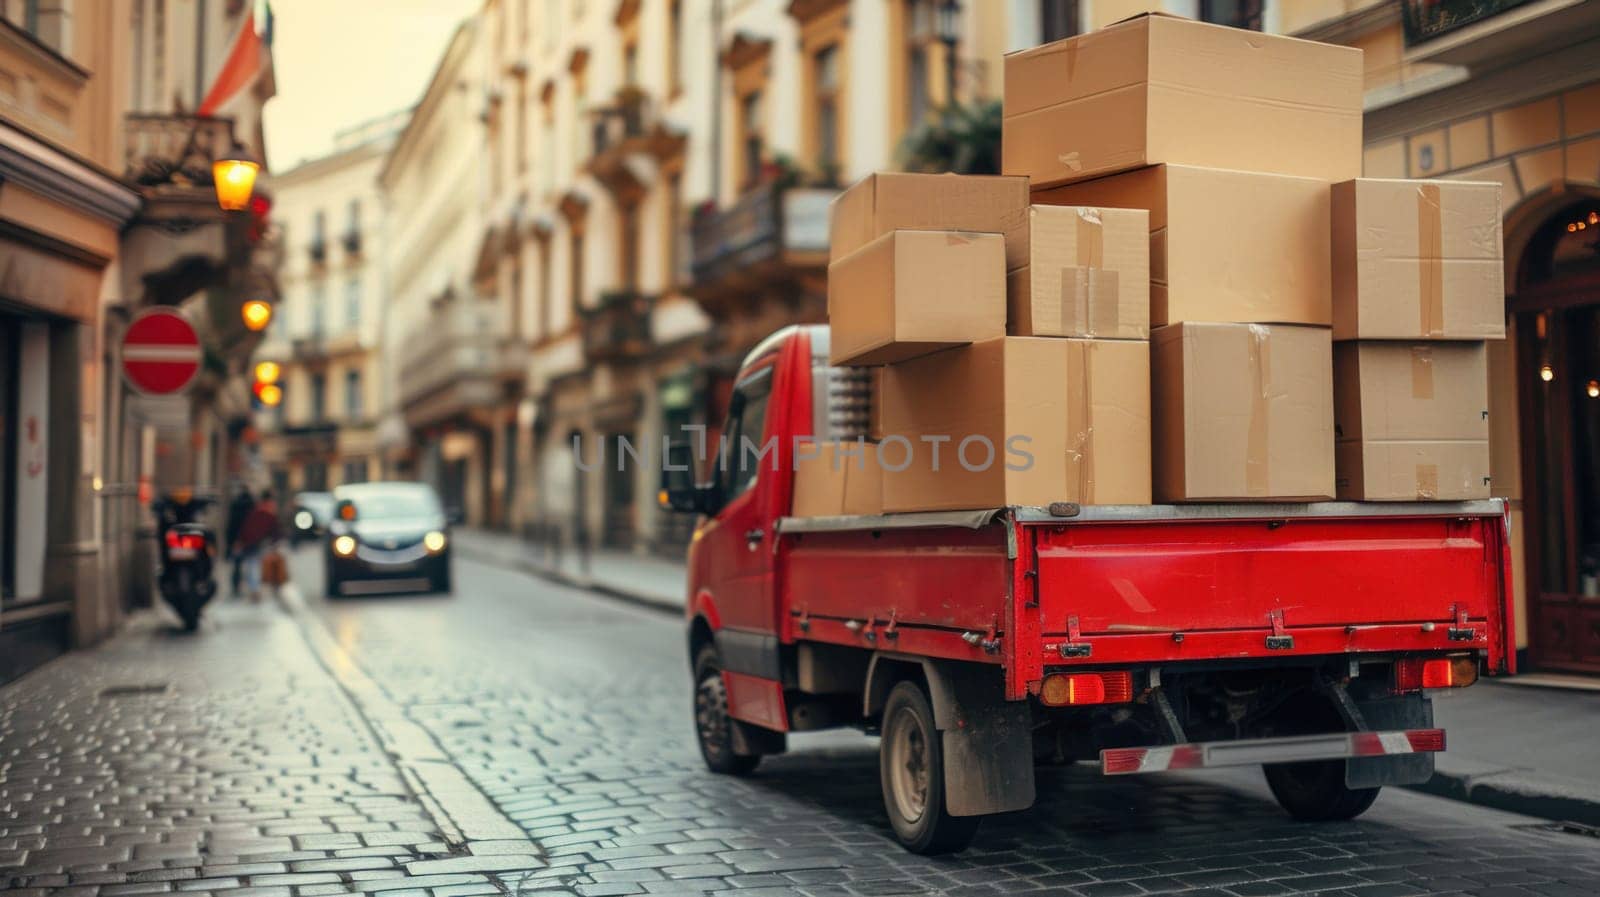 A red truck is parked on a city street with a large number of boxes stacked on truck by golfmerrymaker